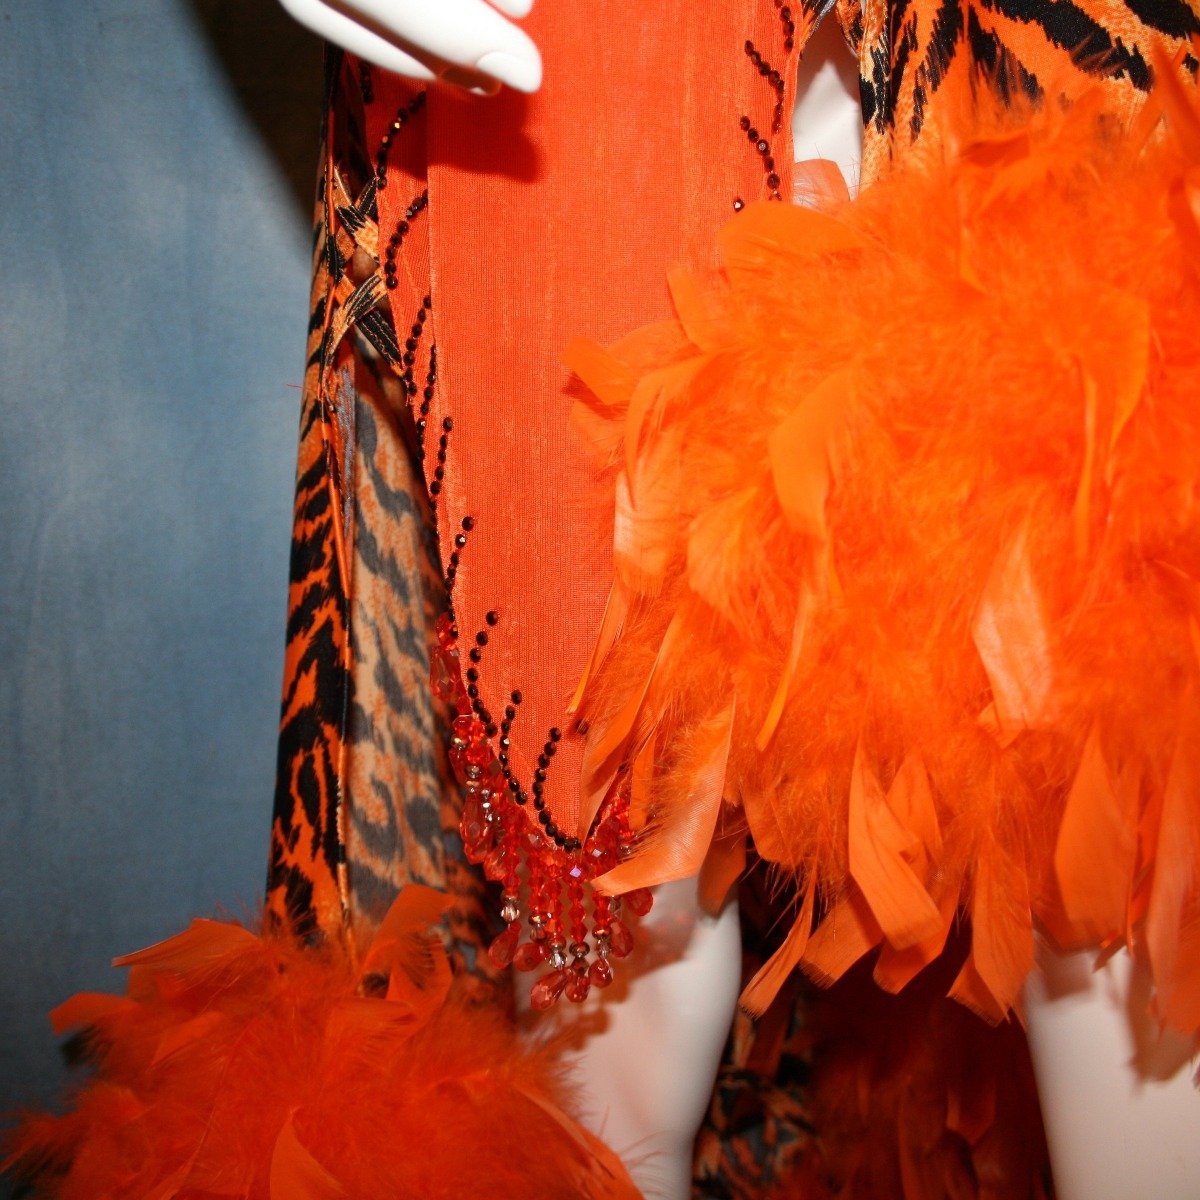 Crystal's Creations close up view of Tiger print & orange Latin/rhythm dress created of tiger print lycra & luxurious orange solid slinky has color blocking, lattice work detailing in front bodice, split sides & low back, as well as intriguing longer back skirting, adorned with orange chandelle feathers, also features detailed Swarovski rhinestone work!